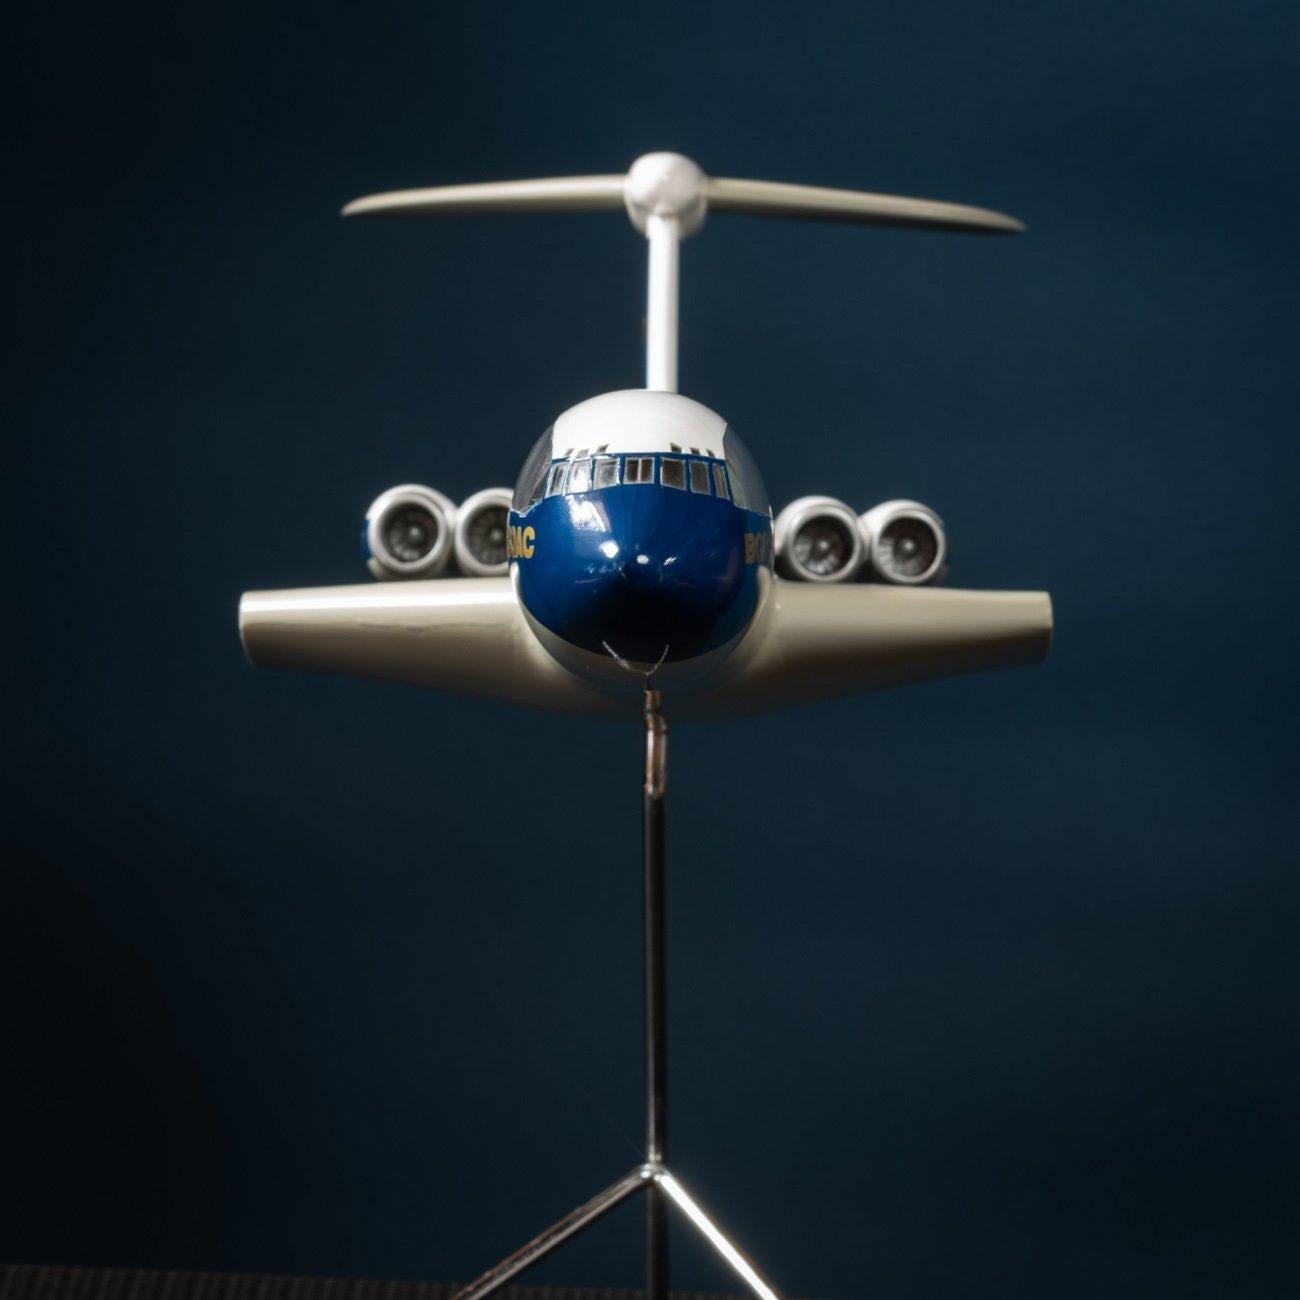 A rare 1960's large scale travel agent's cutaway model of a Vickers VC10 in BOAC livery and mounted on original stand. This type of model enabled passengers to choose where they would like to sit having seen the interior layout of the aircraft when